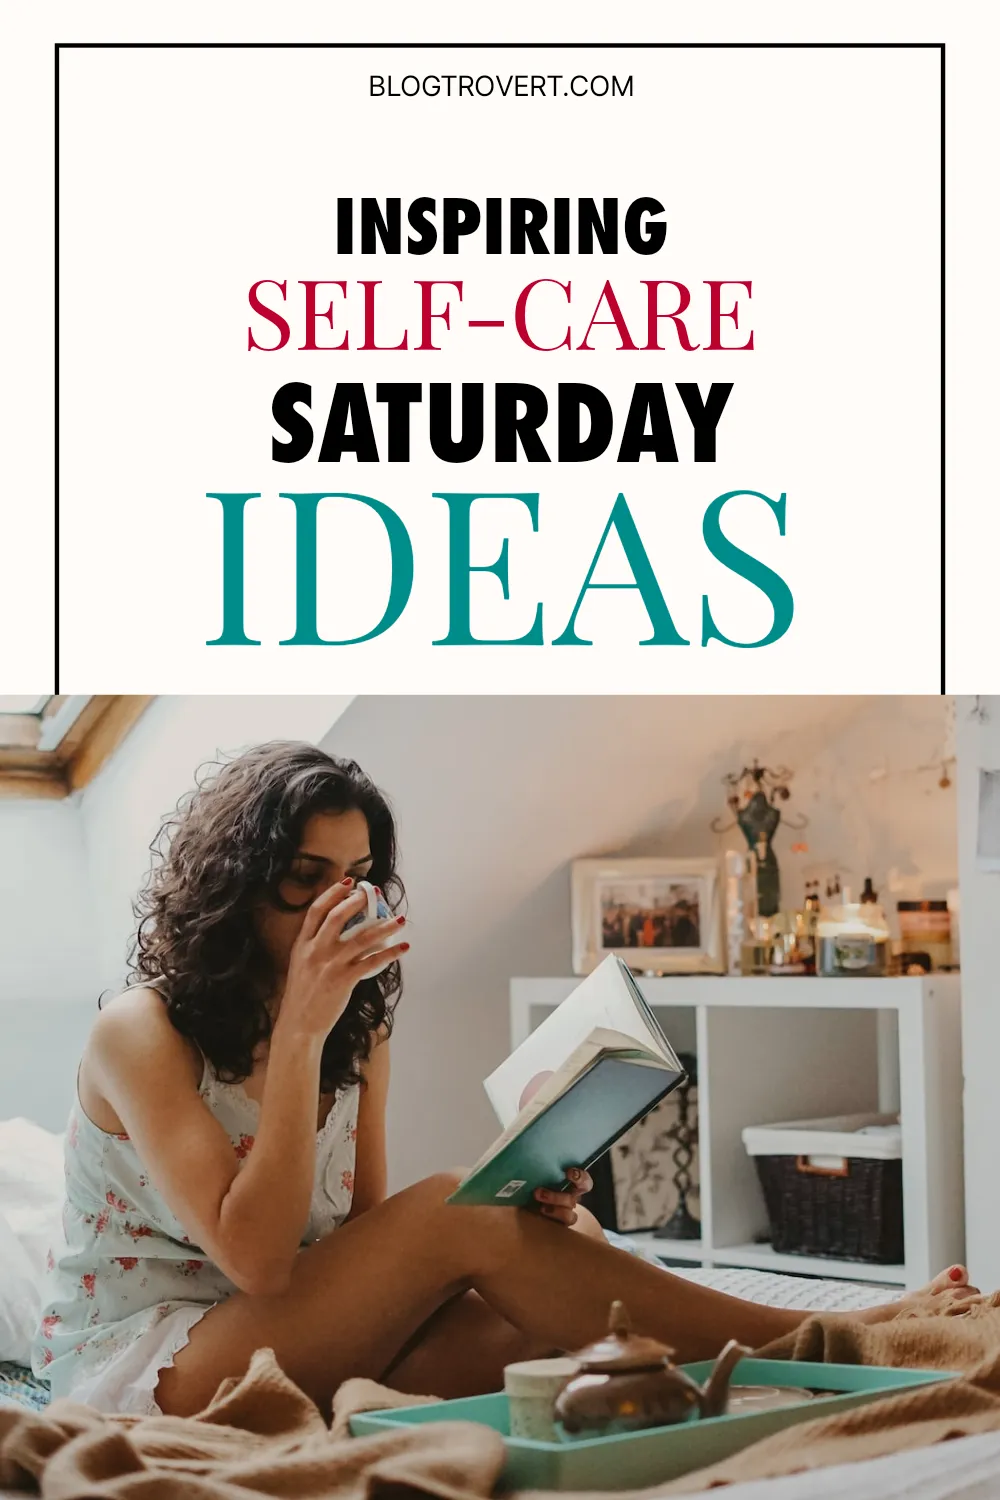 50+ amazing self-care Saturday ideas to try this weekend 2